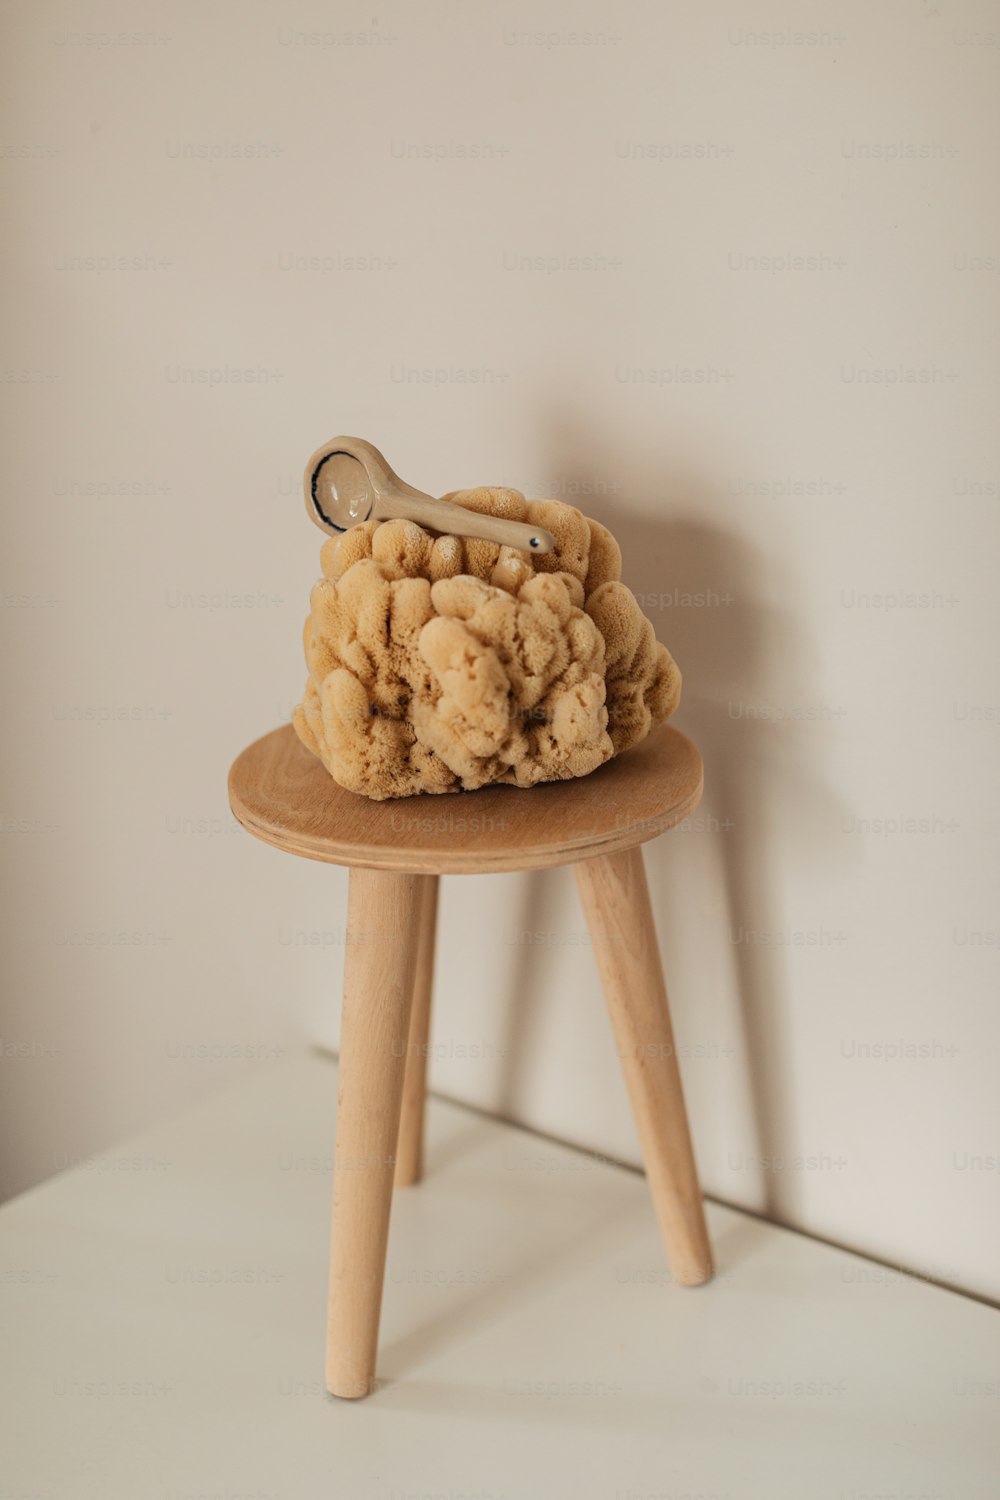 a wooden stool with a hair dryer on top of it